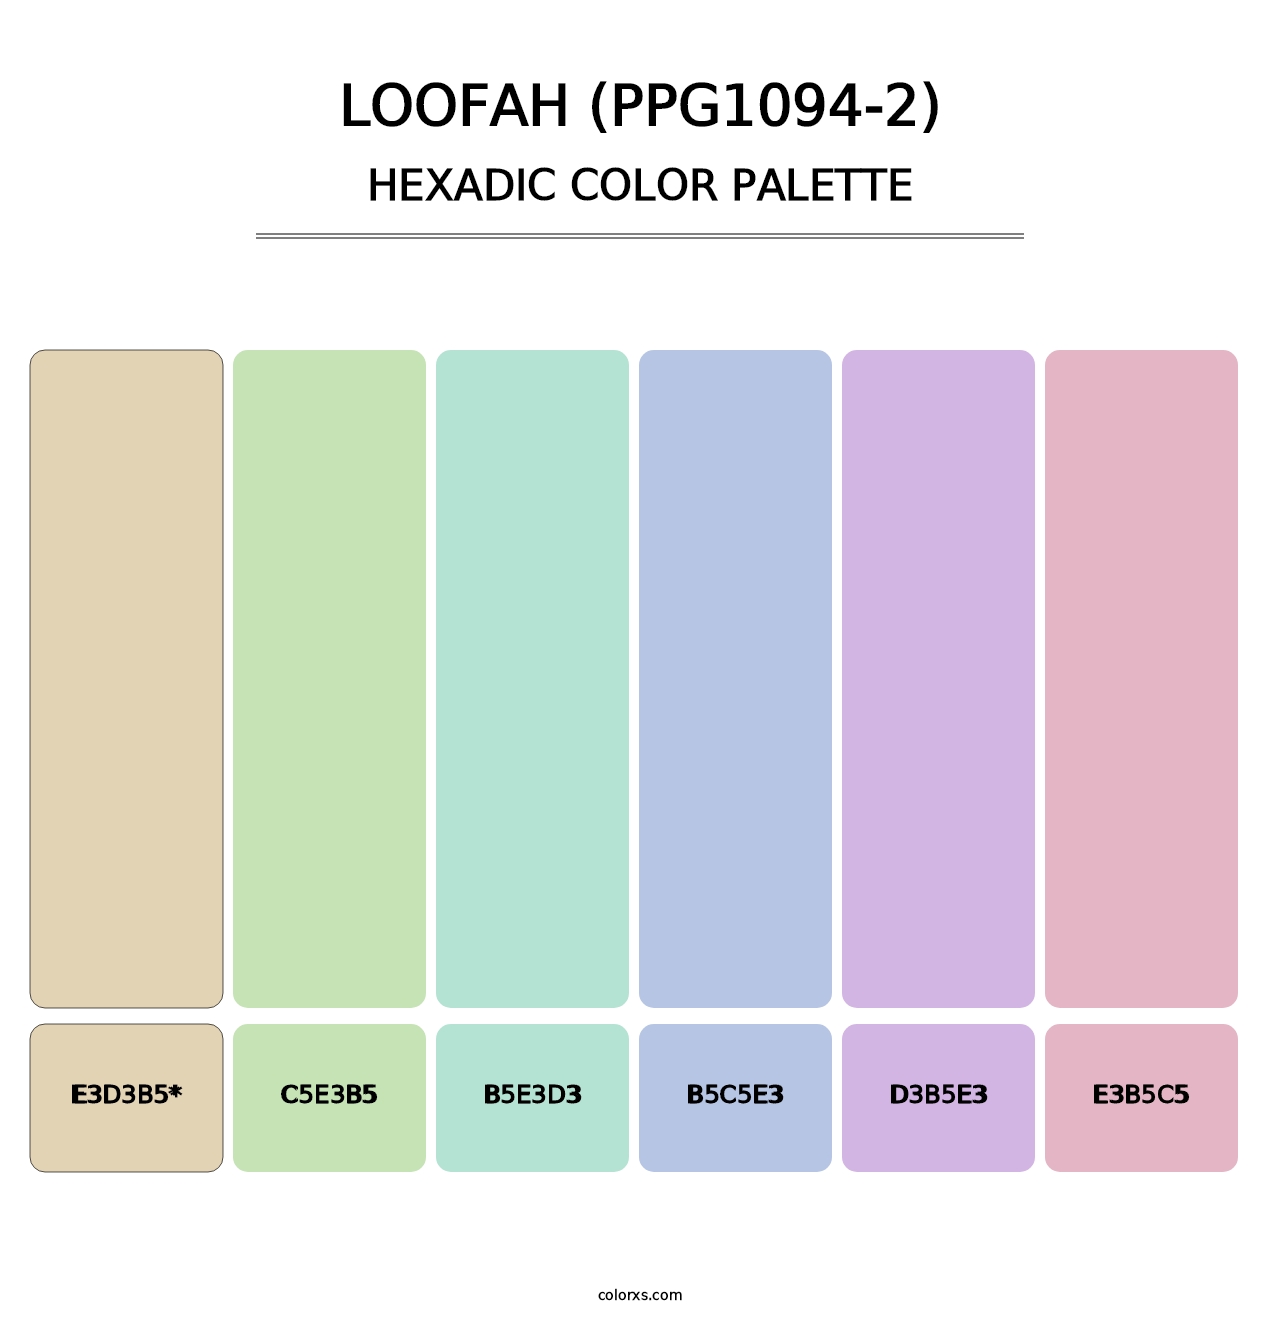 Loofah (PPG1094-2) - Hexadic Color Palette